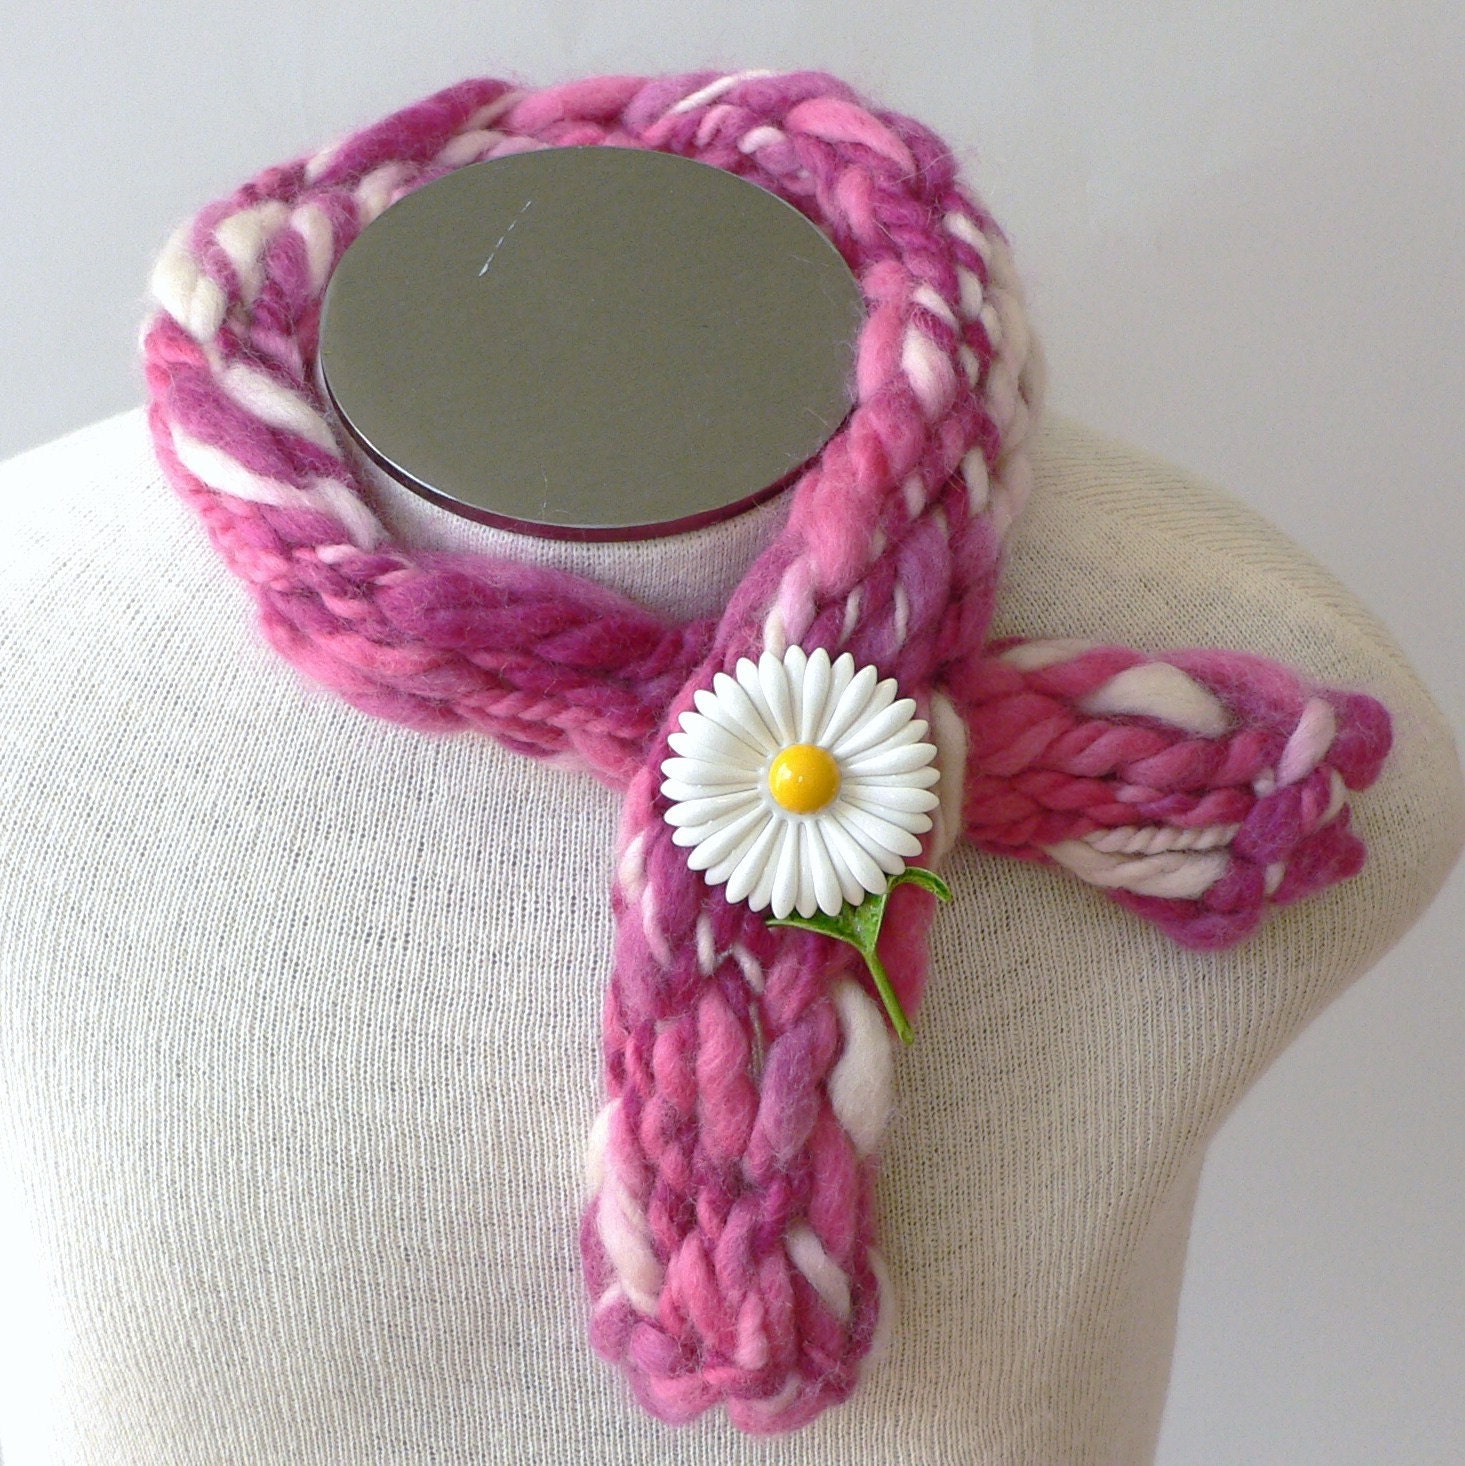 Think Pink Wool Scarflette - Breast Cancer Awareness - Donation